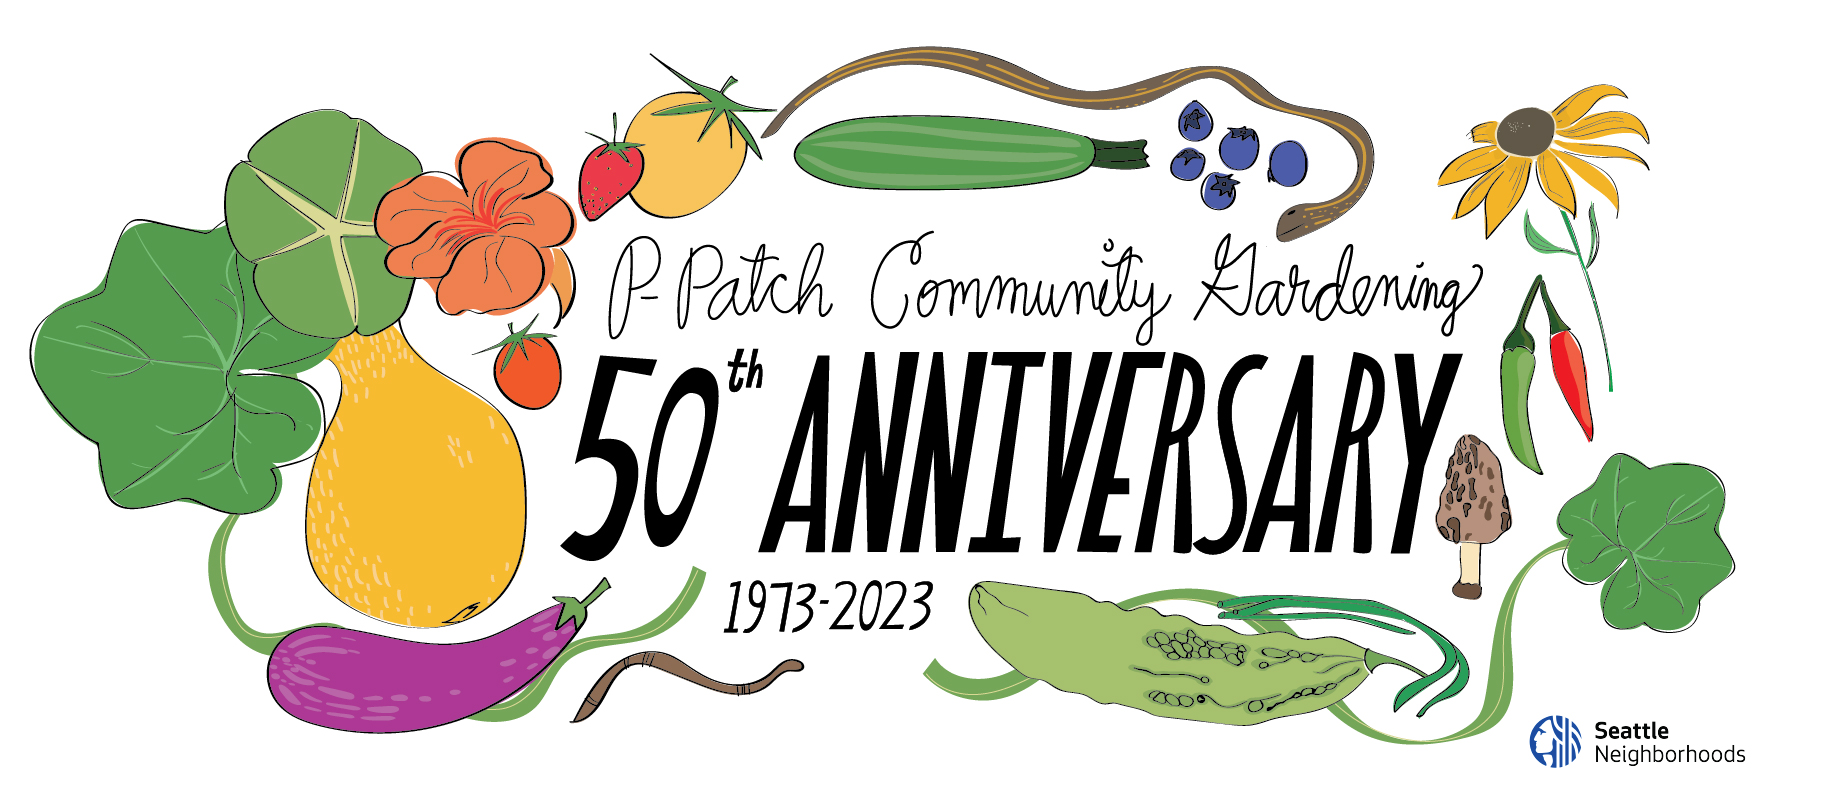 Hand drawn vegetables, berries, critters and leaves with the words P-Patch Community Gardening 50th Anniversary, 1973-2023